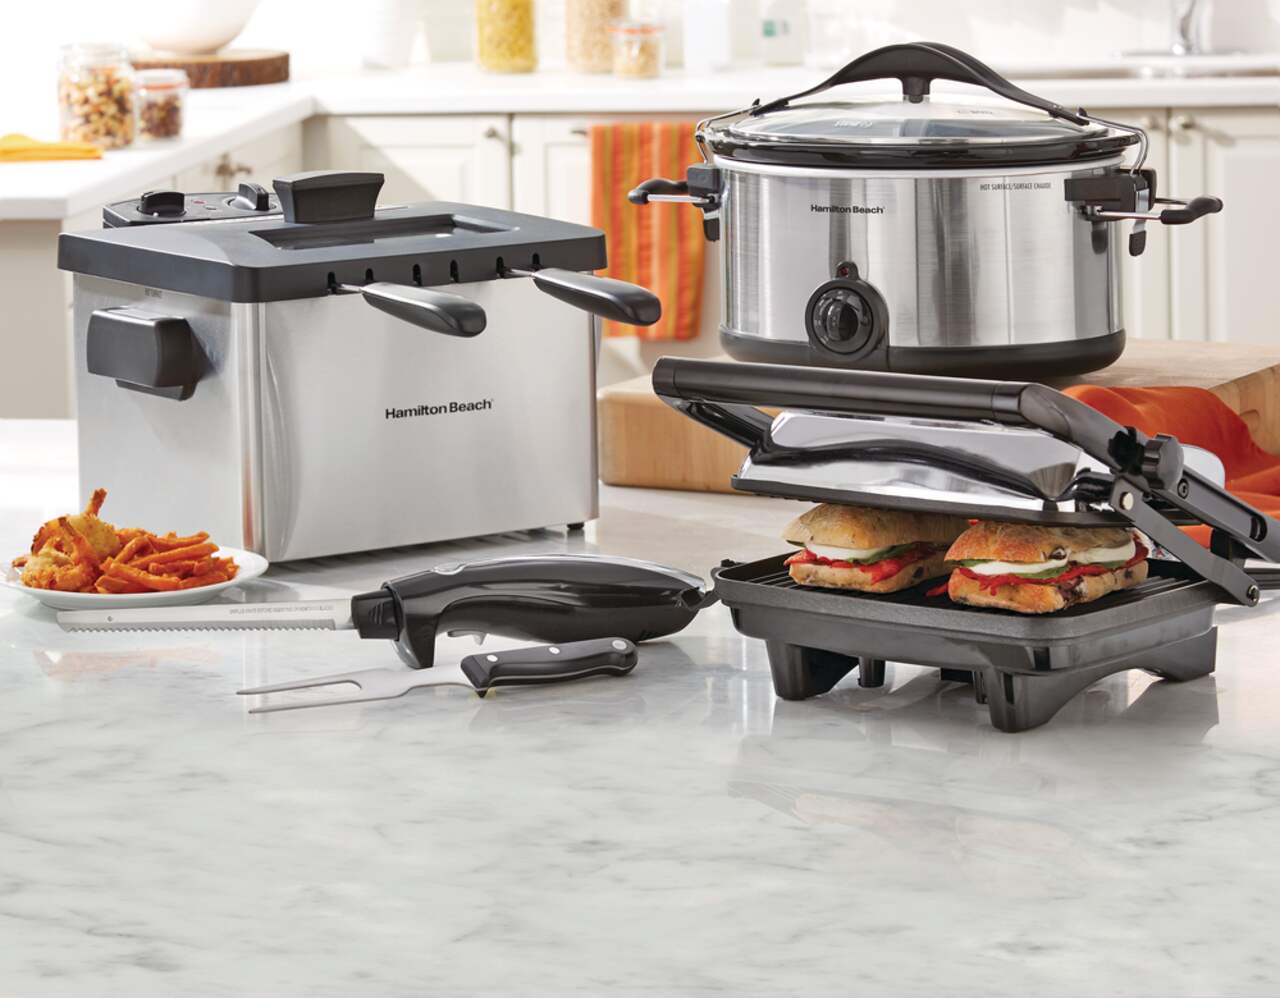 https://media-www.canadiantire.ca/product/living/kitchen/kitchen-appliances/0431196/hamilton-beach-panini-press-c7fc5643-7ccc-47be-997b-9be8ab6aa3ea.png?imdensity=1&imwidth=640&impolicy=mZoom